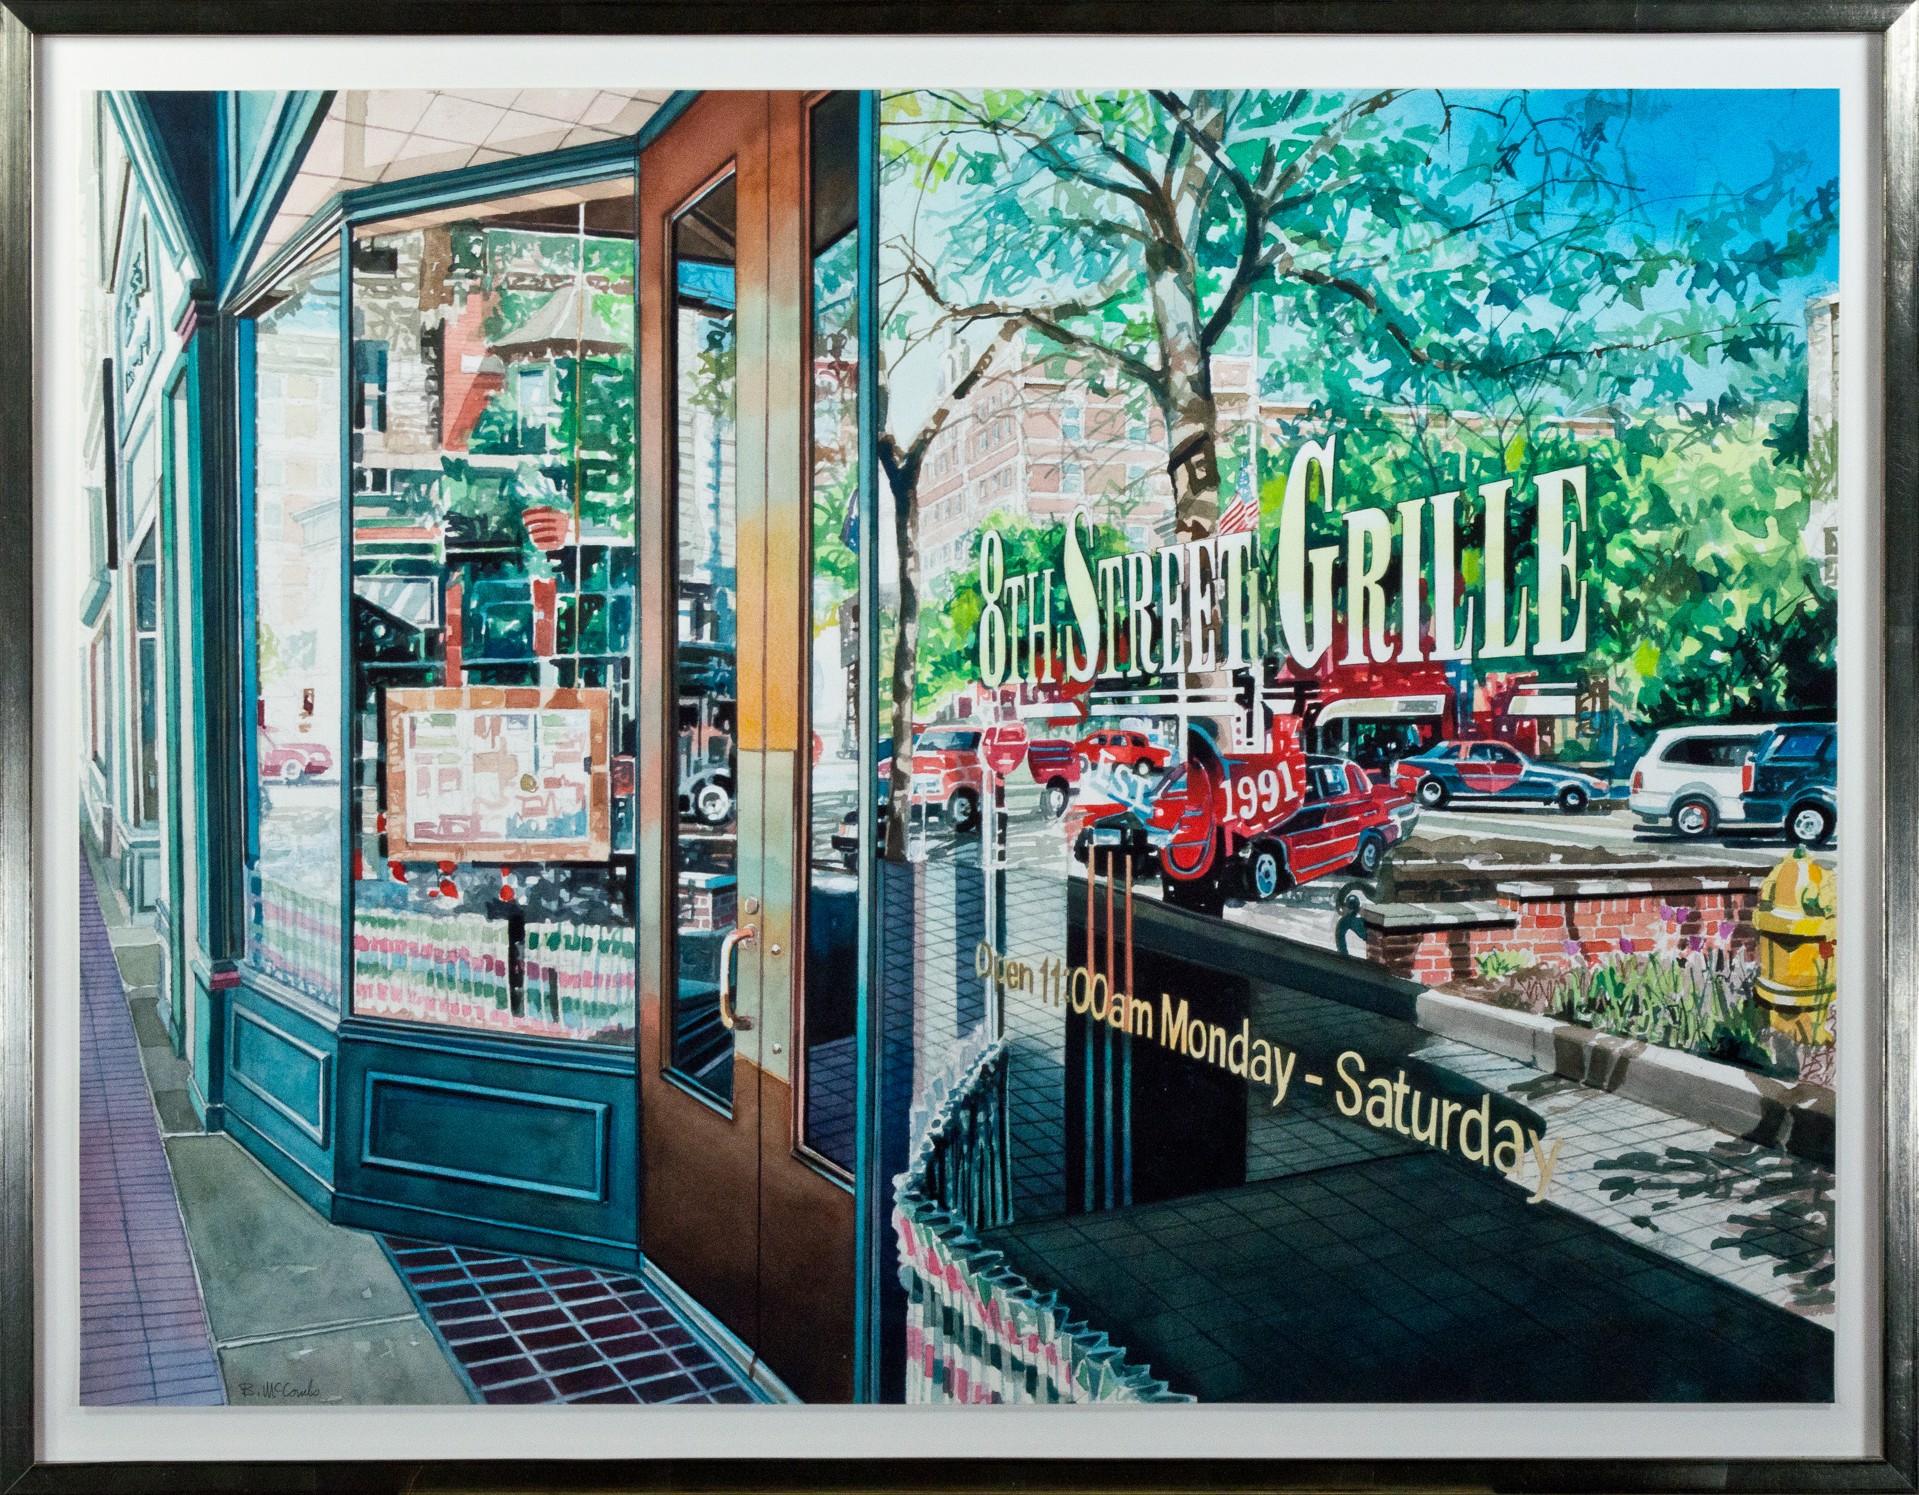 Reflection 8th Street Grille by Bruce McCombs